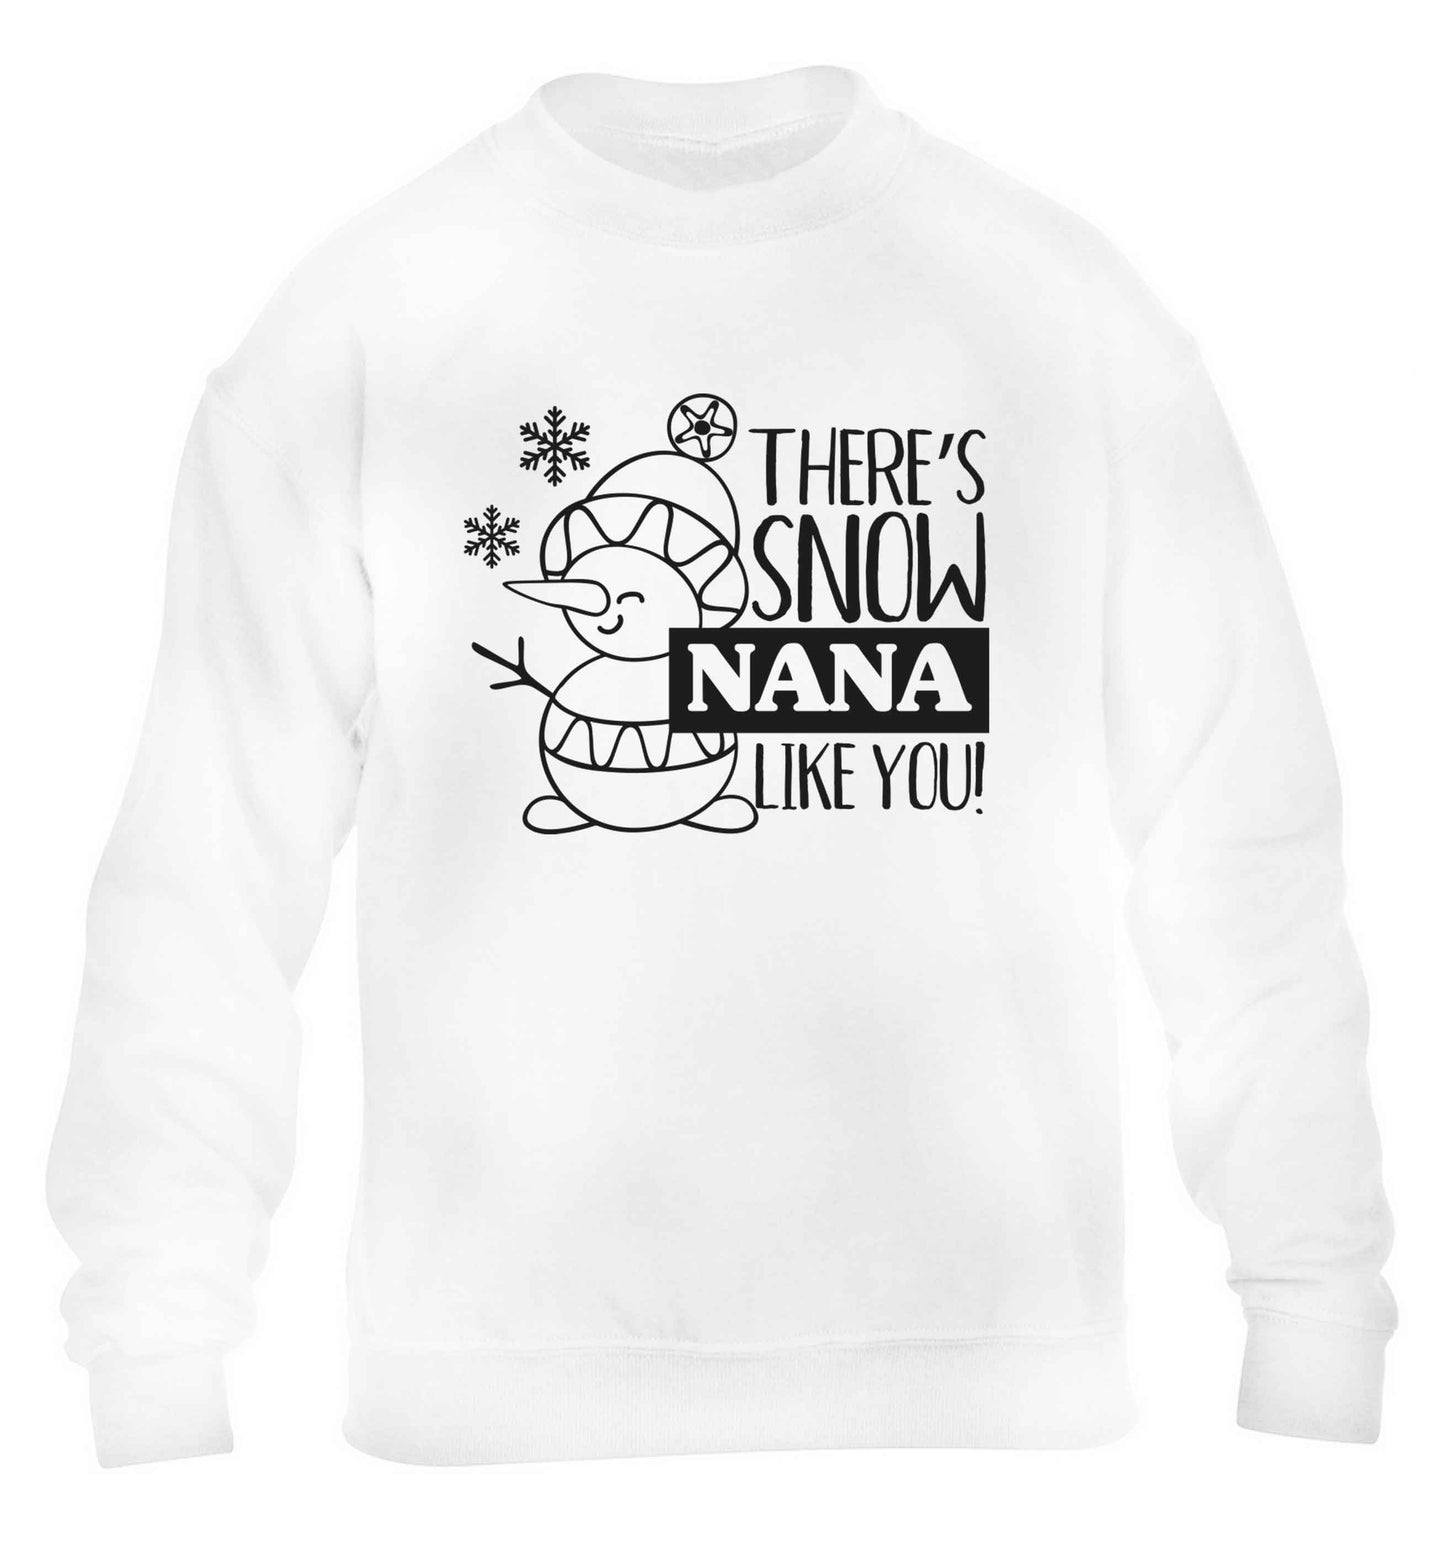 There's snow nana like you children's white sweater 12-13 Years